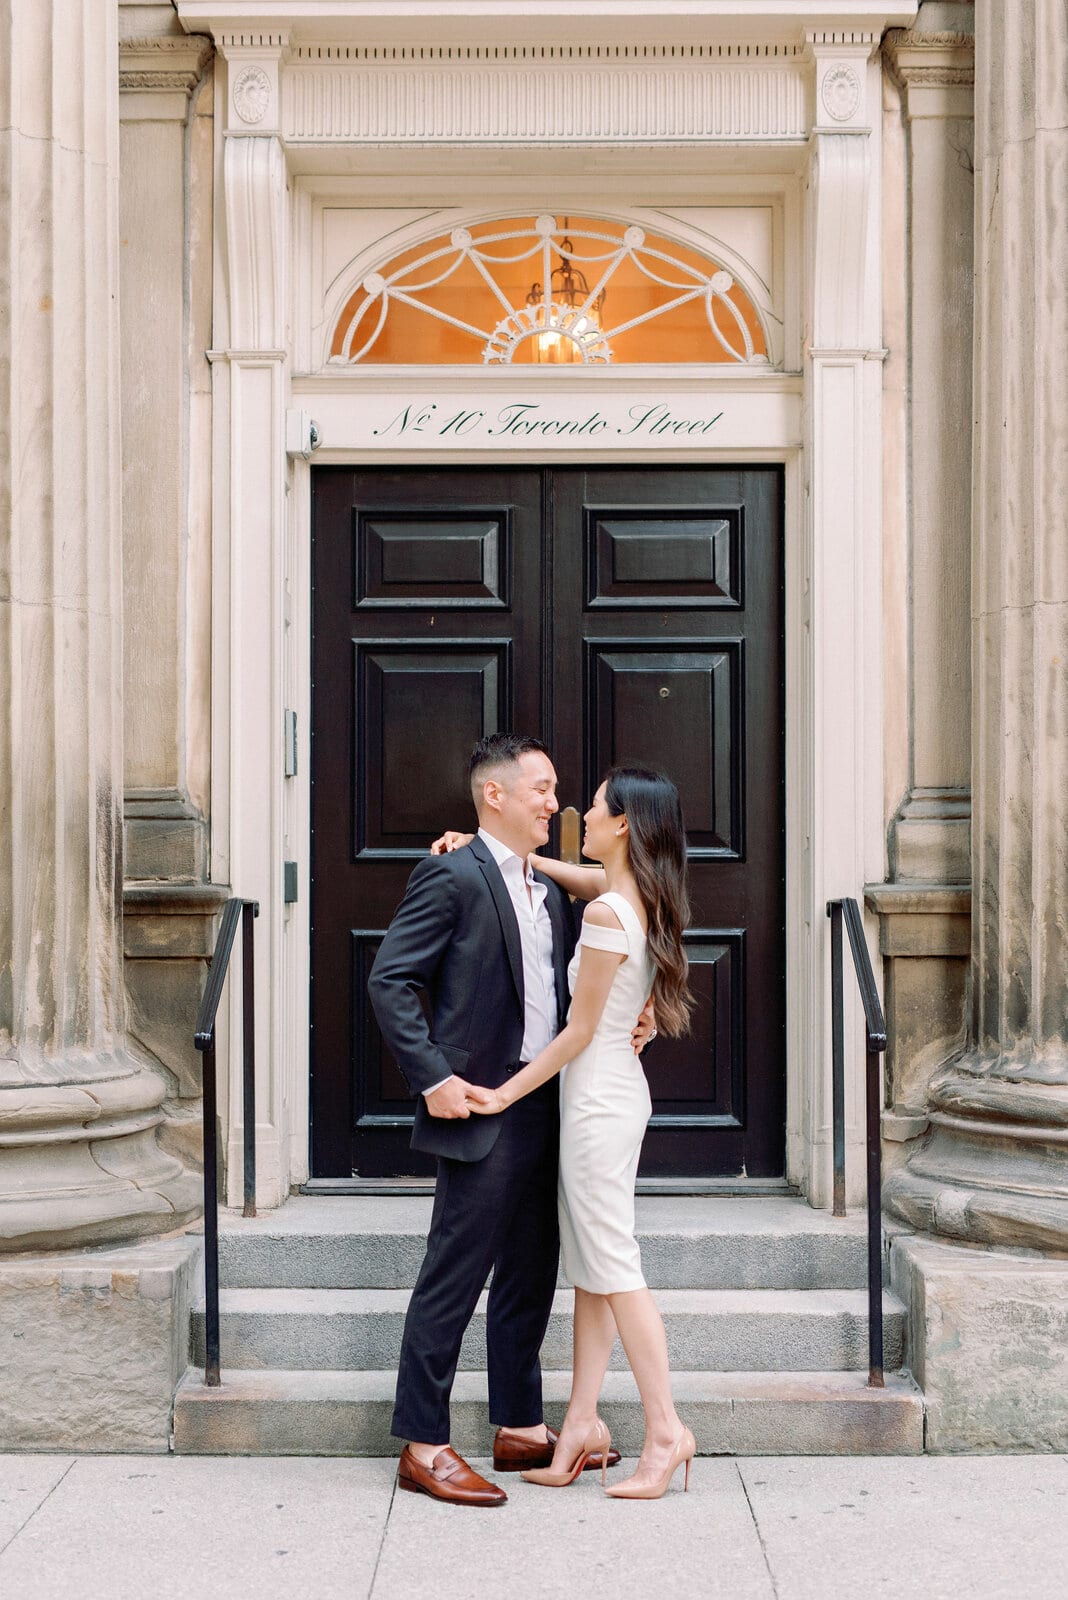 Downtown Toronto Engagement Photos Financial District Modern Chic Timeless Couple Embracing in Front of Beautiful Door | Toronto Wedding Photography Jacqueline James Photography